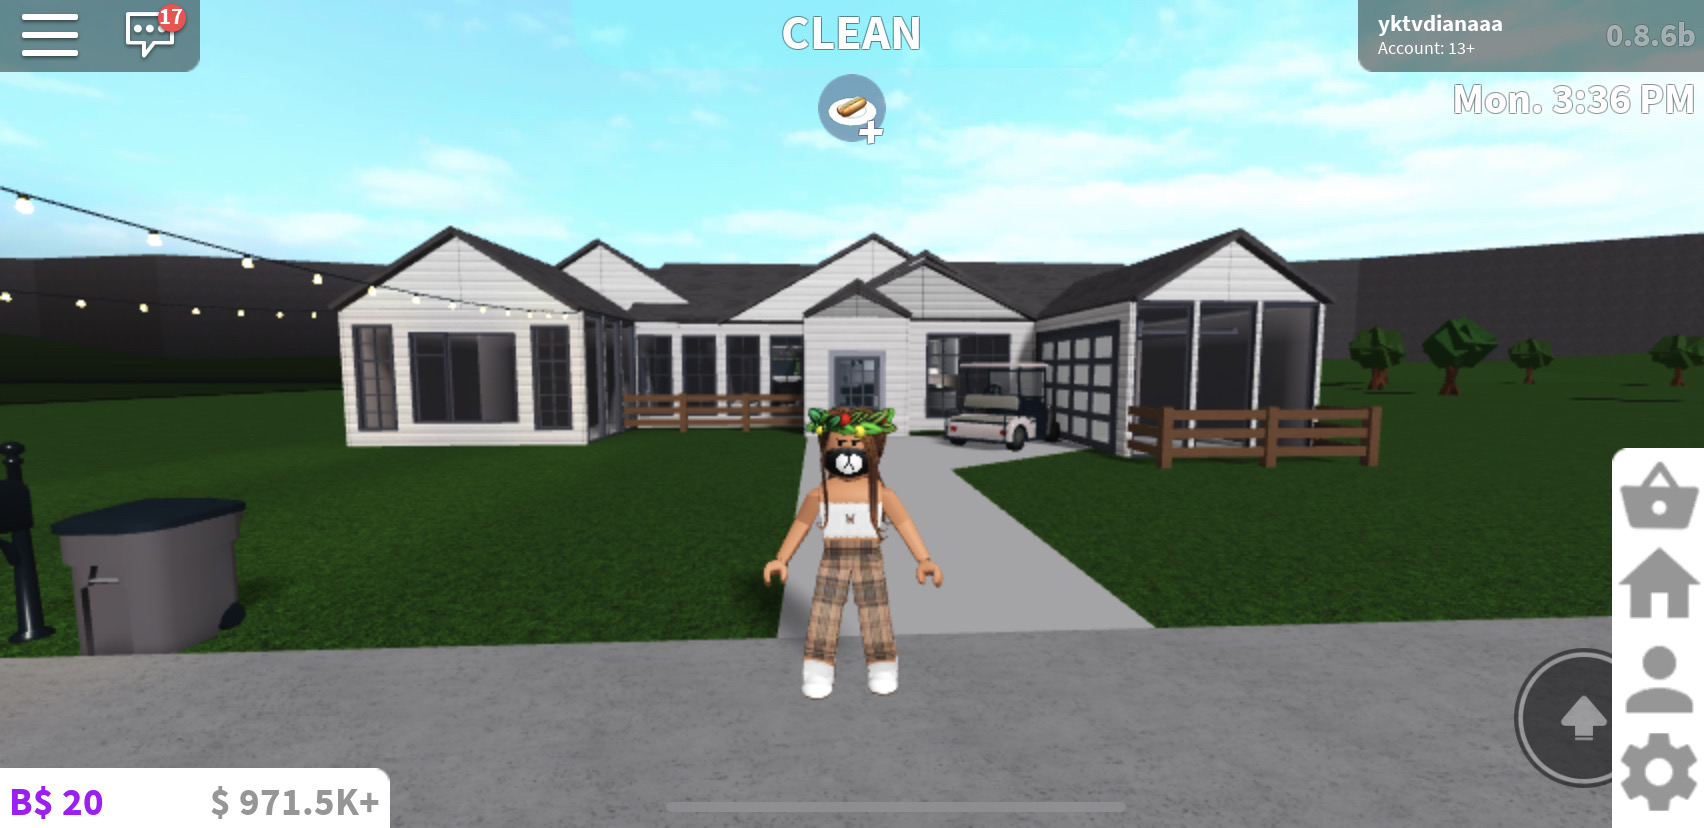 Roblox Bloxburg Houses Building Image By Roblox - roblox bloxburg house build 5k